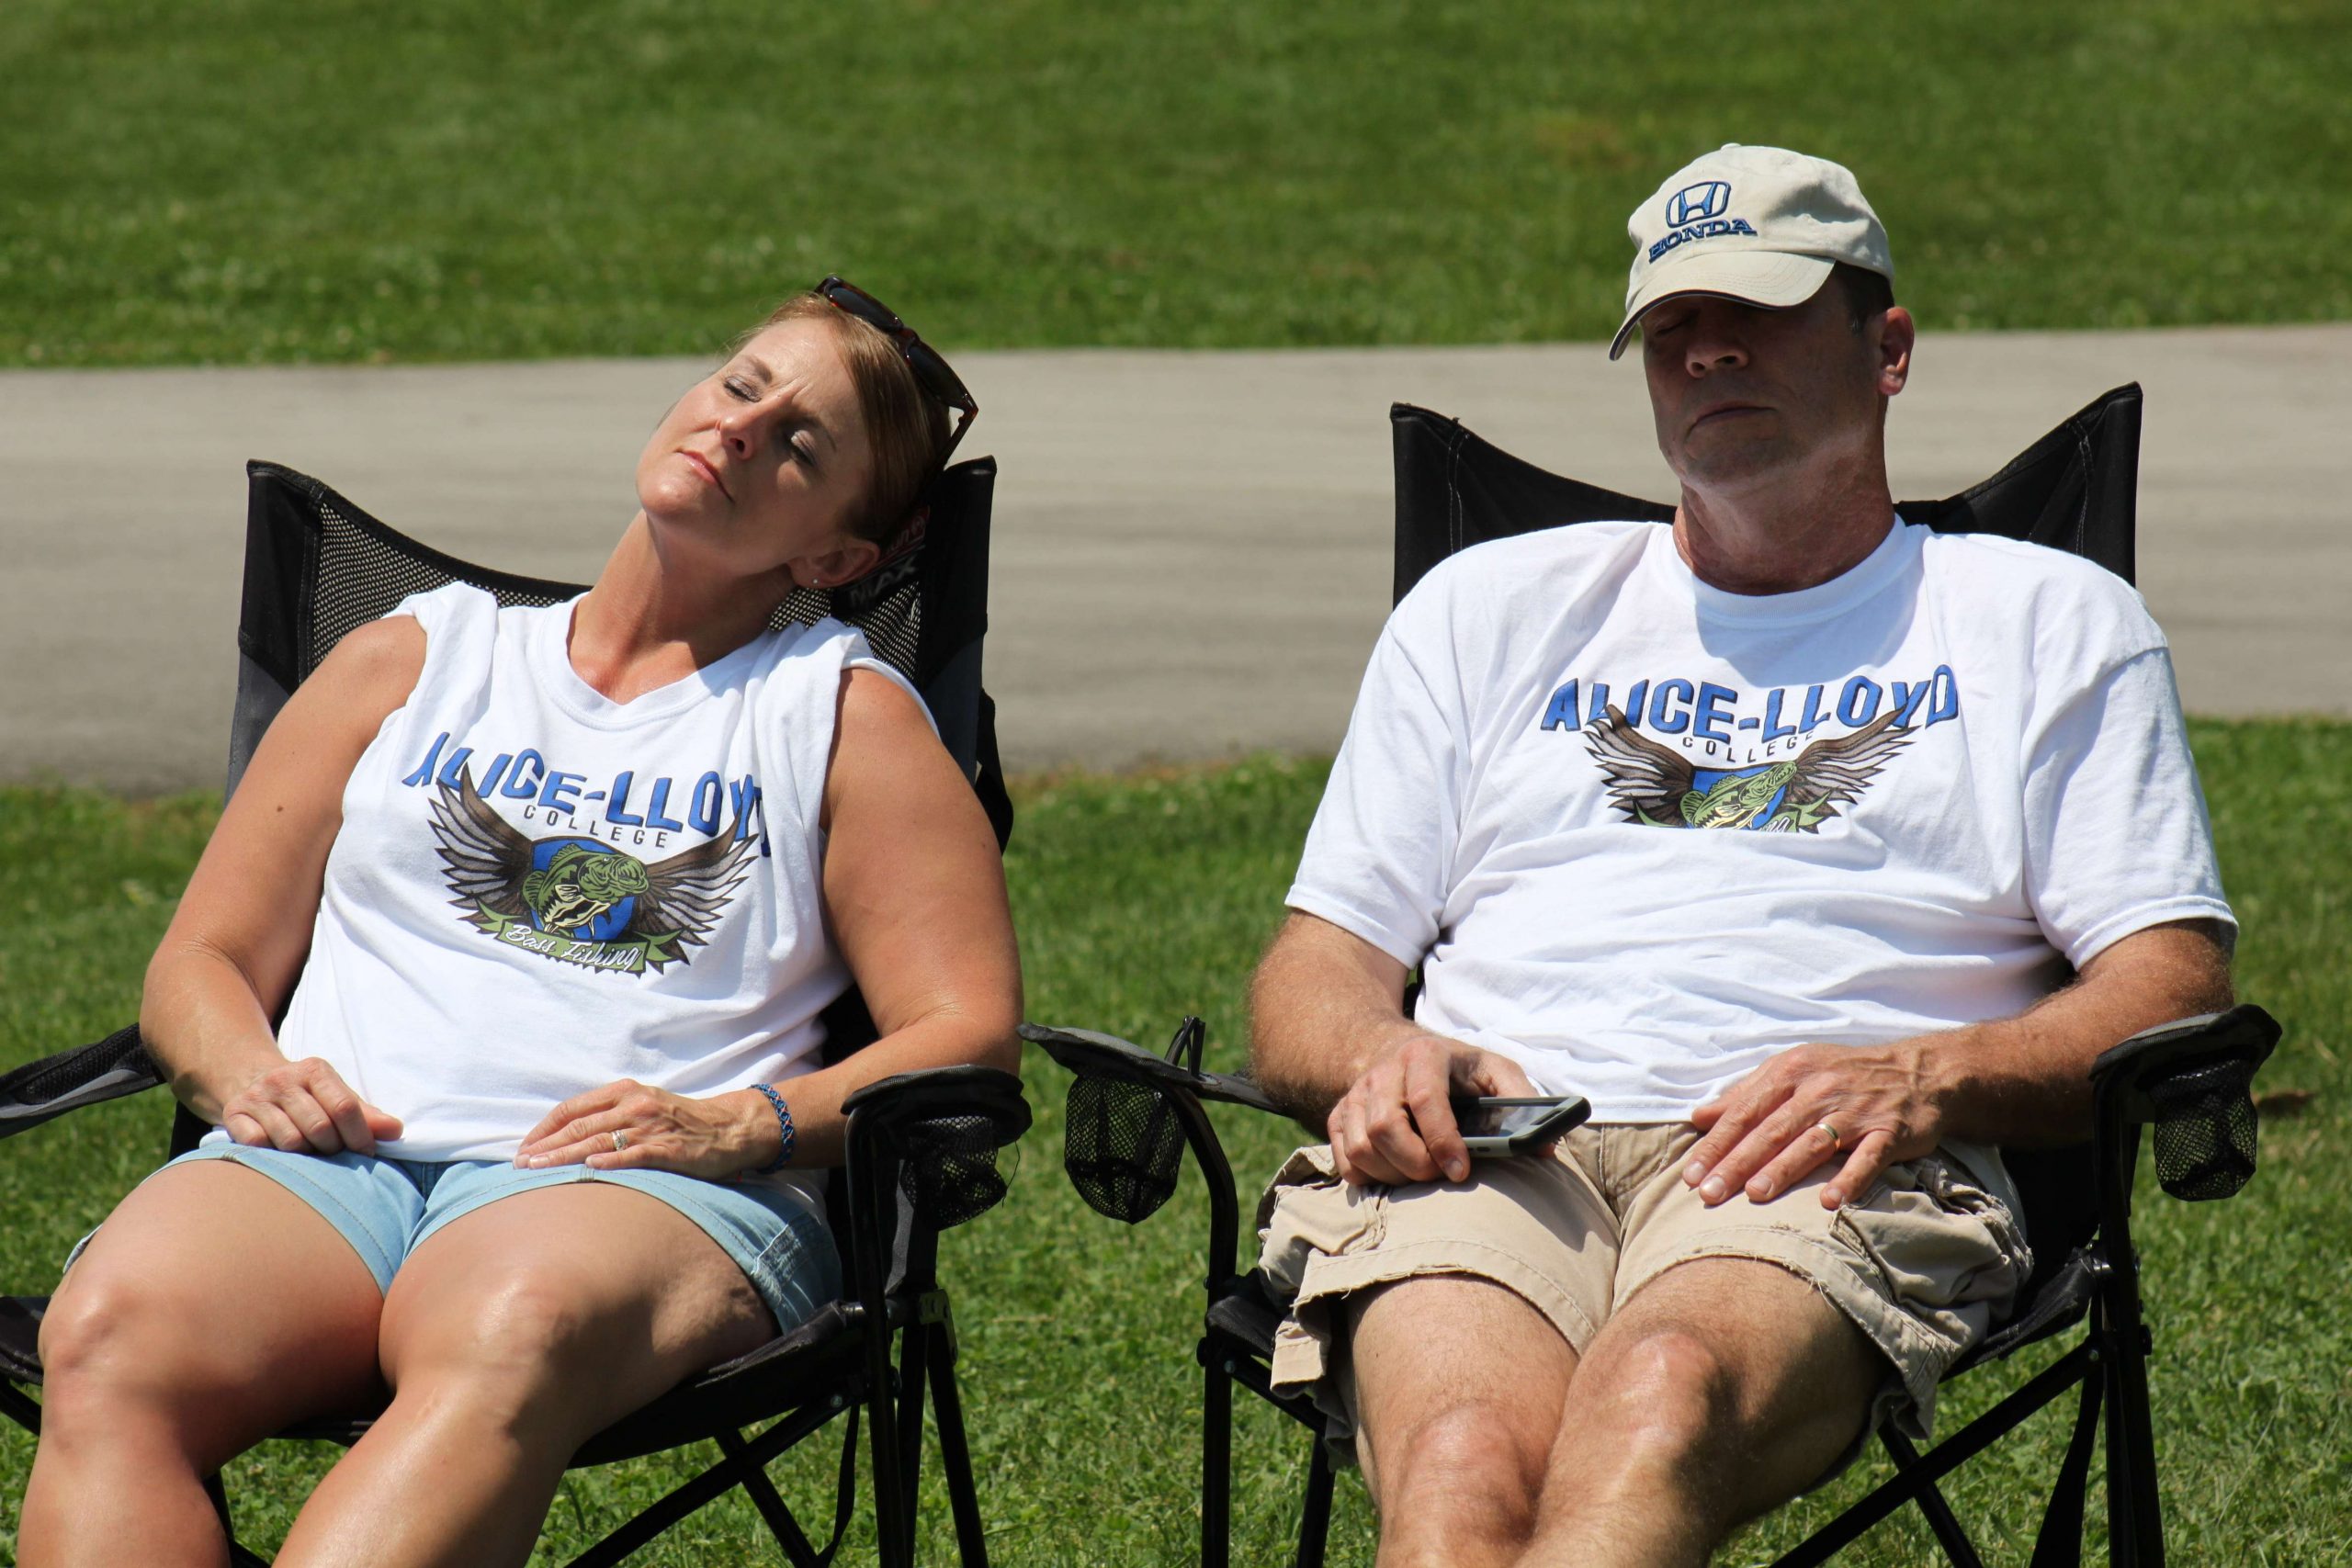 Day 2 of the Carhartt Bassmaster College Series Eastern Tour presented by Bass Pro Shops brought pleasant weather, rather than Thursdayâs afternoon rain storms. Temperatures climbed into the upper 80s, which had fishing fans seeking shade at the TVA Dam Ramp in Jefferson City. This couple, however, enjoyed the sunshine and took a nap in the process.